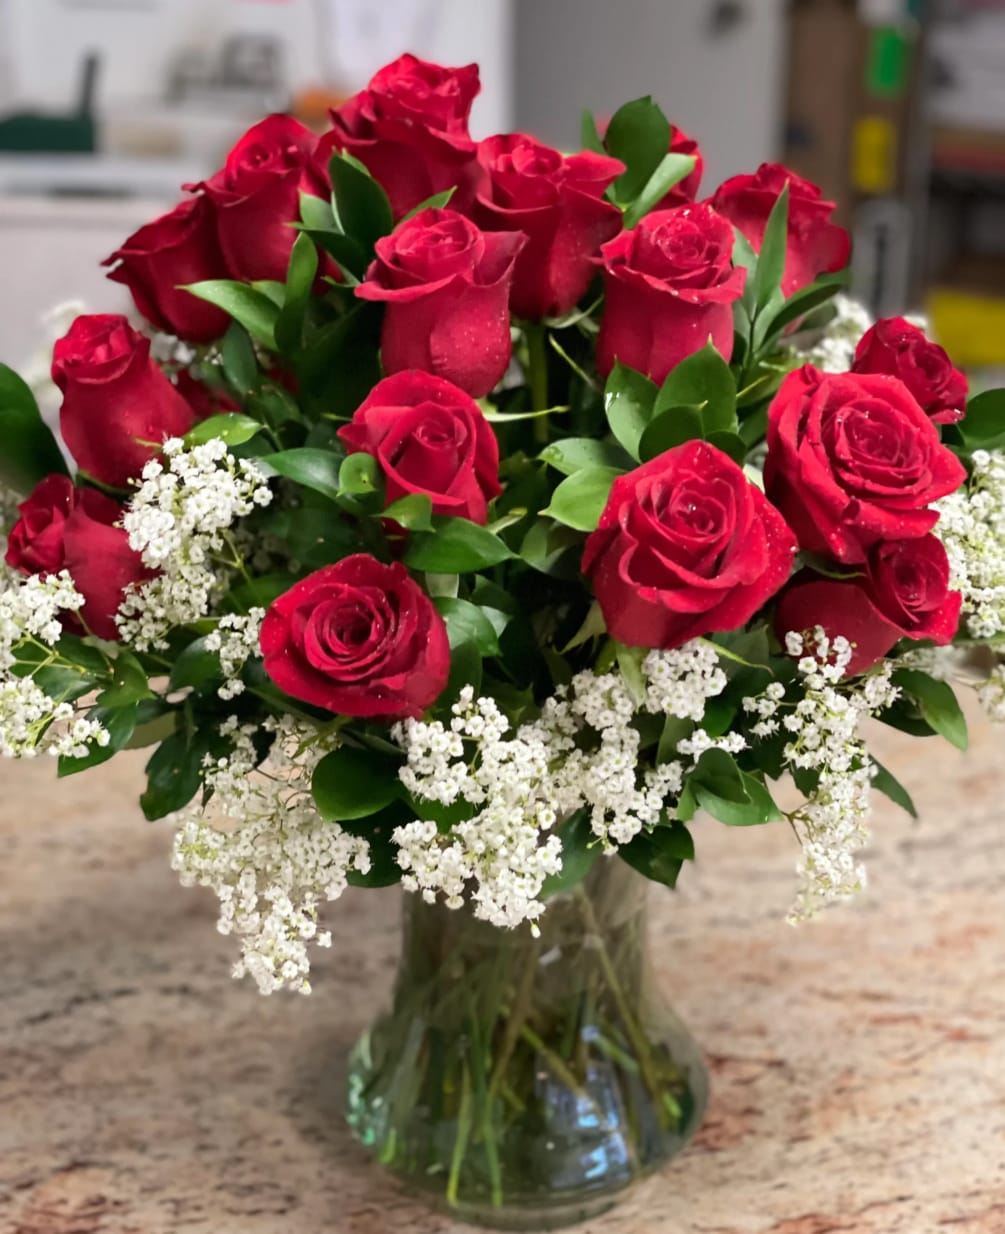 A classic long stem roses with baby breaths and greenery

$150 (2 dozen)